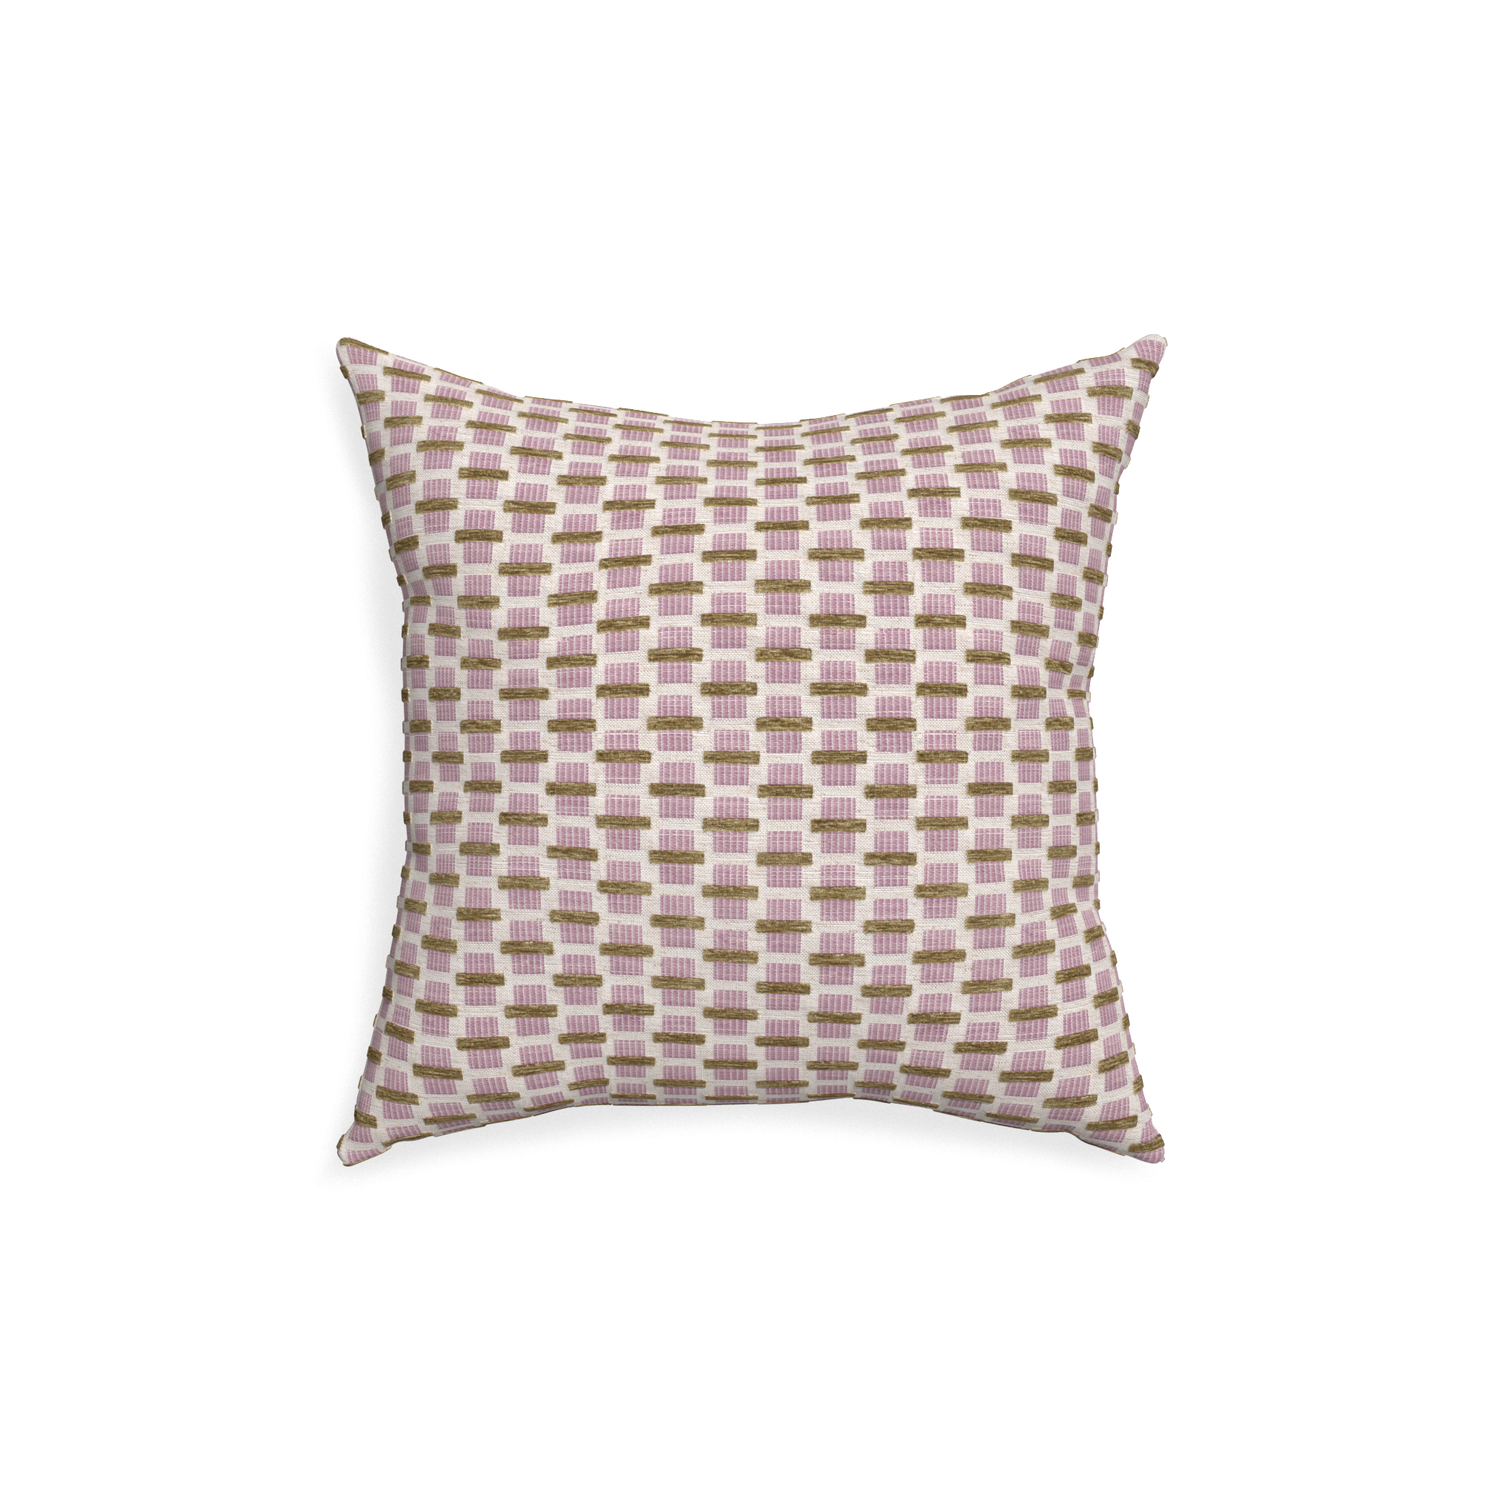 18-square willow orchid custom pink geometric chenillepillow with none on white background